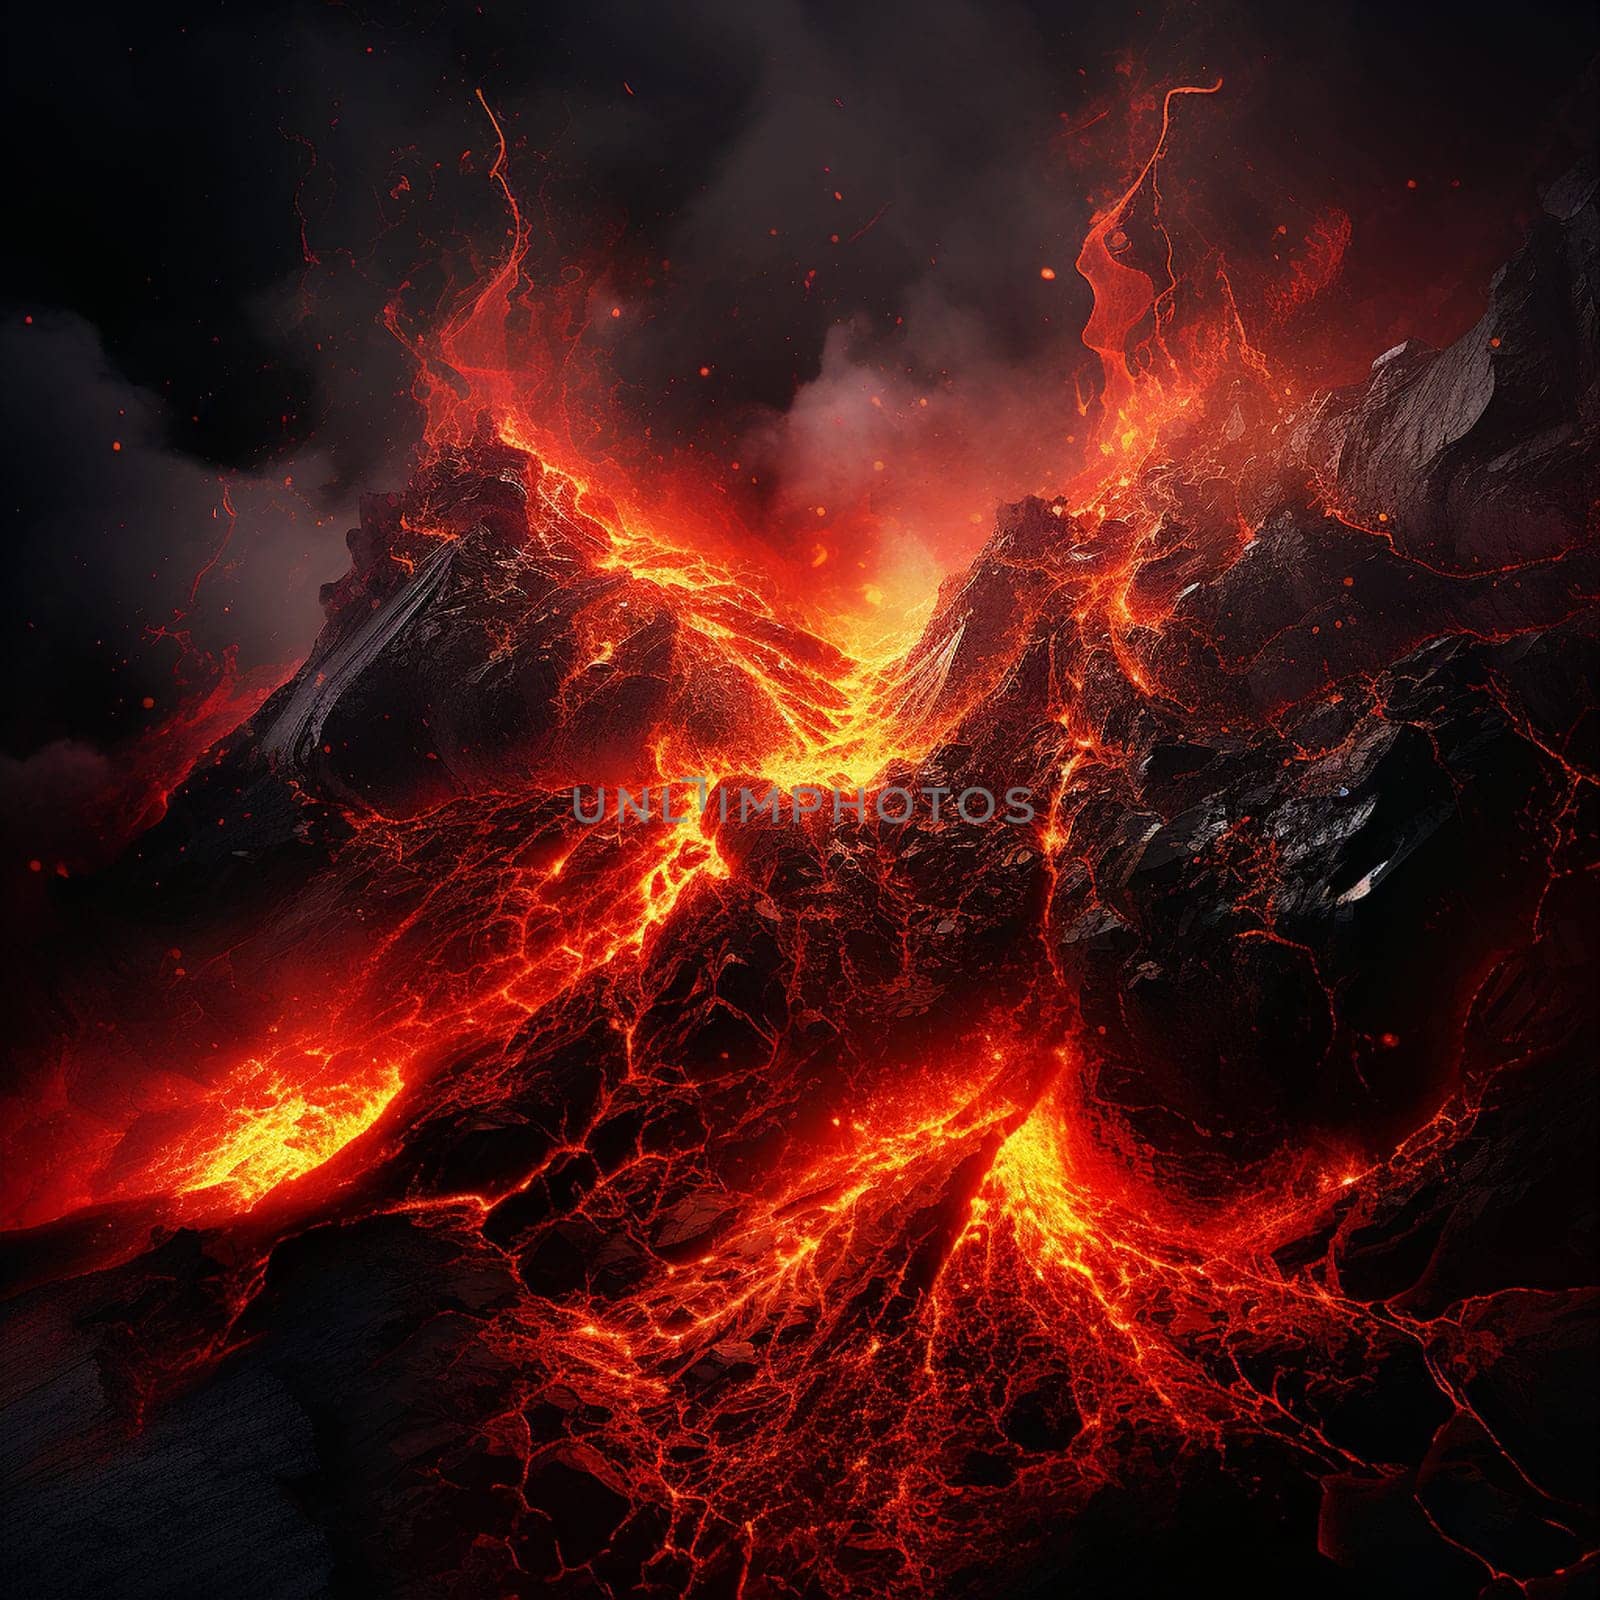 Witness the mesmerizing power of a volcanic eruption in this abstract art depiction titled 'Infernal Surge'. Vibrant tendrils of molten lava shoot up from the volcanic crater, illuminating the night sky with fiery hues. The eruption showcases a mix of awe-inspiring beauty and raw, destructive power, as rocks and ash are propelled into the atmosphere. Lava cascades down the mountainside, engulfing everything in its path, leaving a trail of destruction. This captivating image captures the intense contrast between the fiery red-hot lava and the dark, ominous background, creating a visual spectacle that demands attention. 'Infernal Surge' is perfect for microstock sites in search of dynamic and eye-catching imagery.